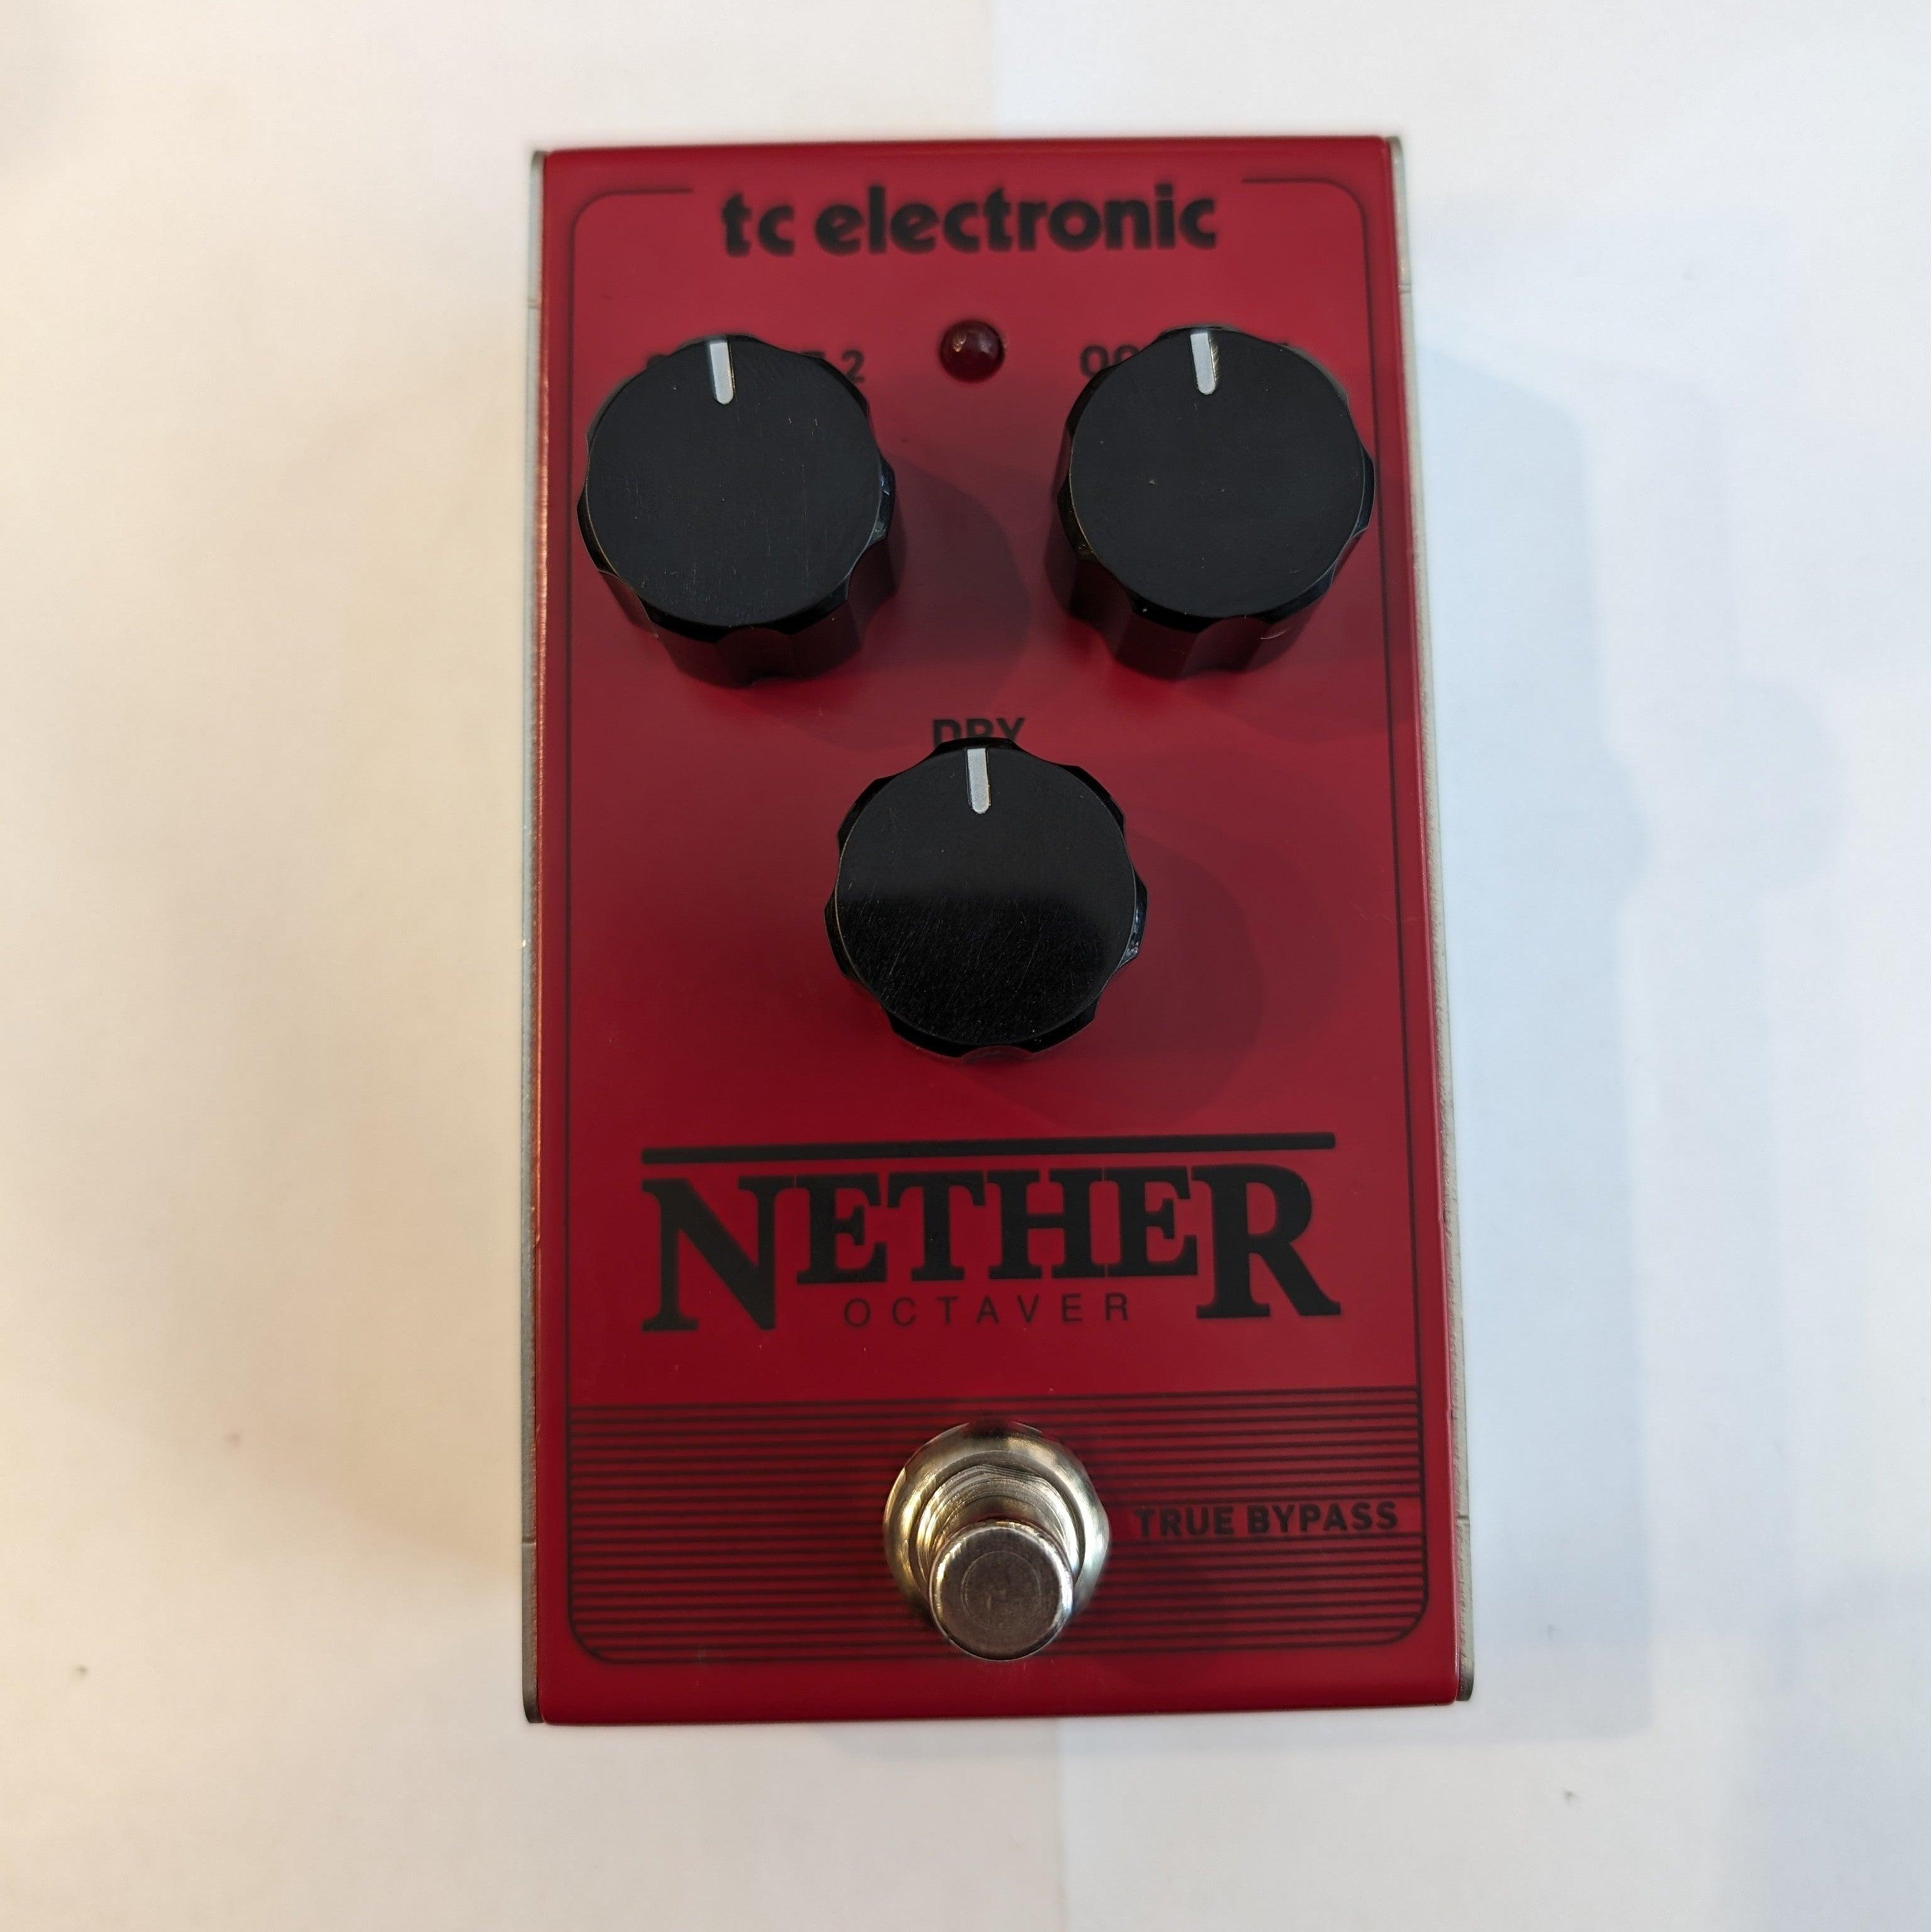 Secondhand TC Nether Octaver - Muso's Stuff